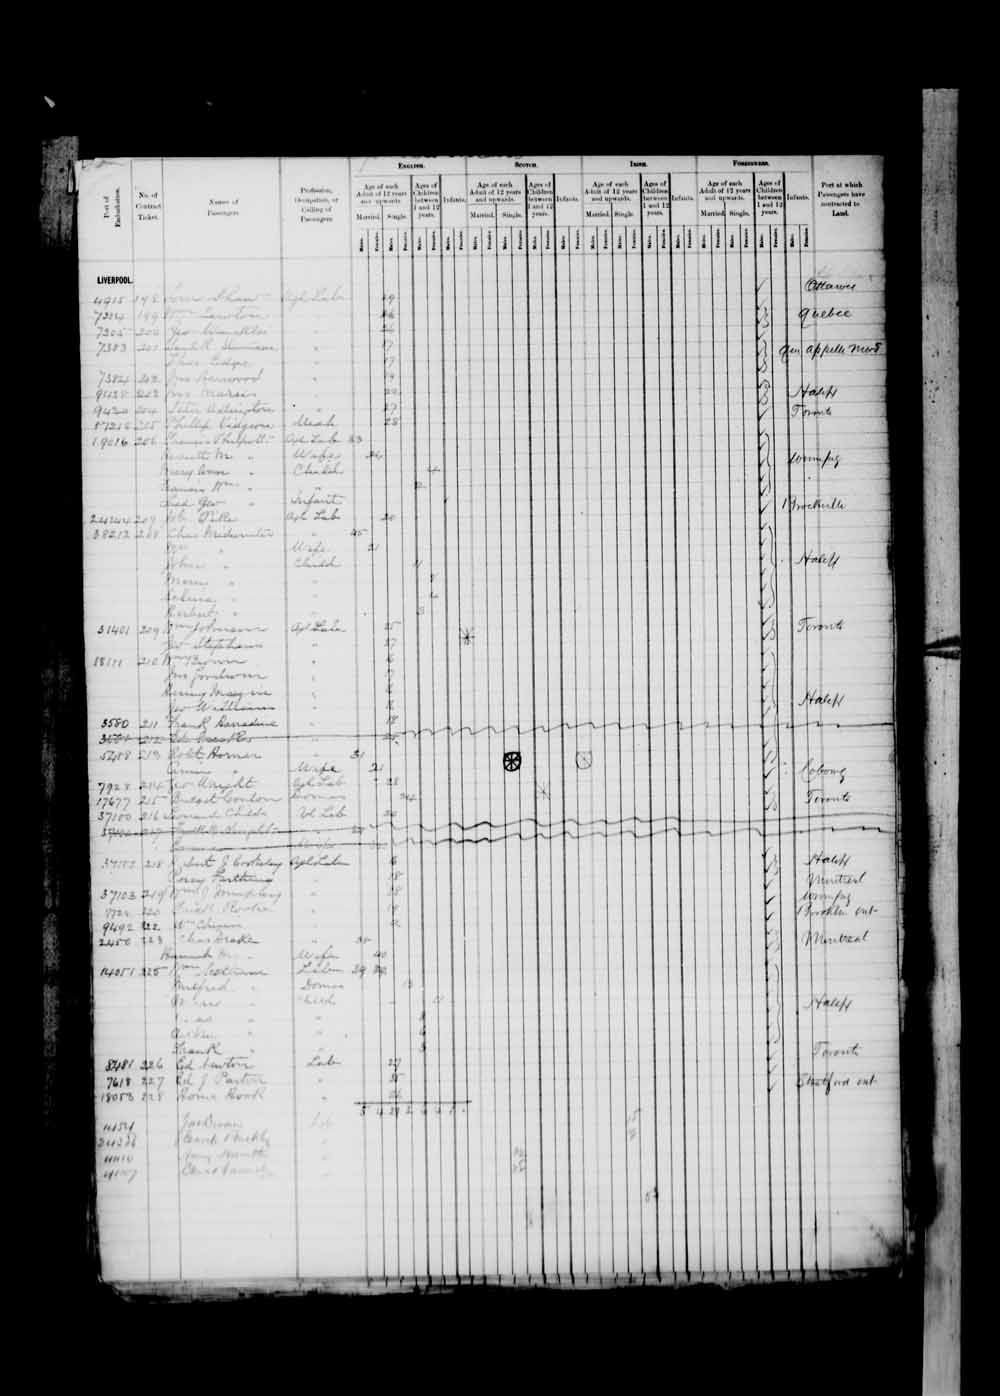 Digitized page of Passenger Lists for Image No.: e003674942